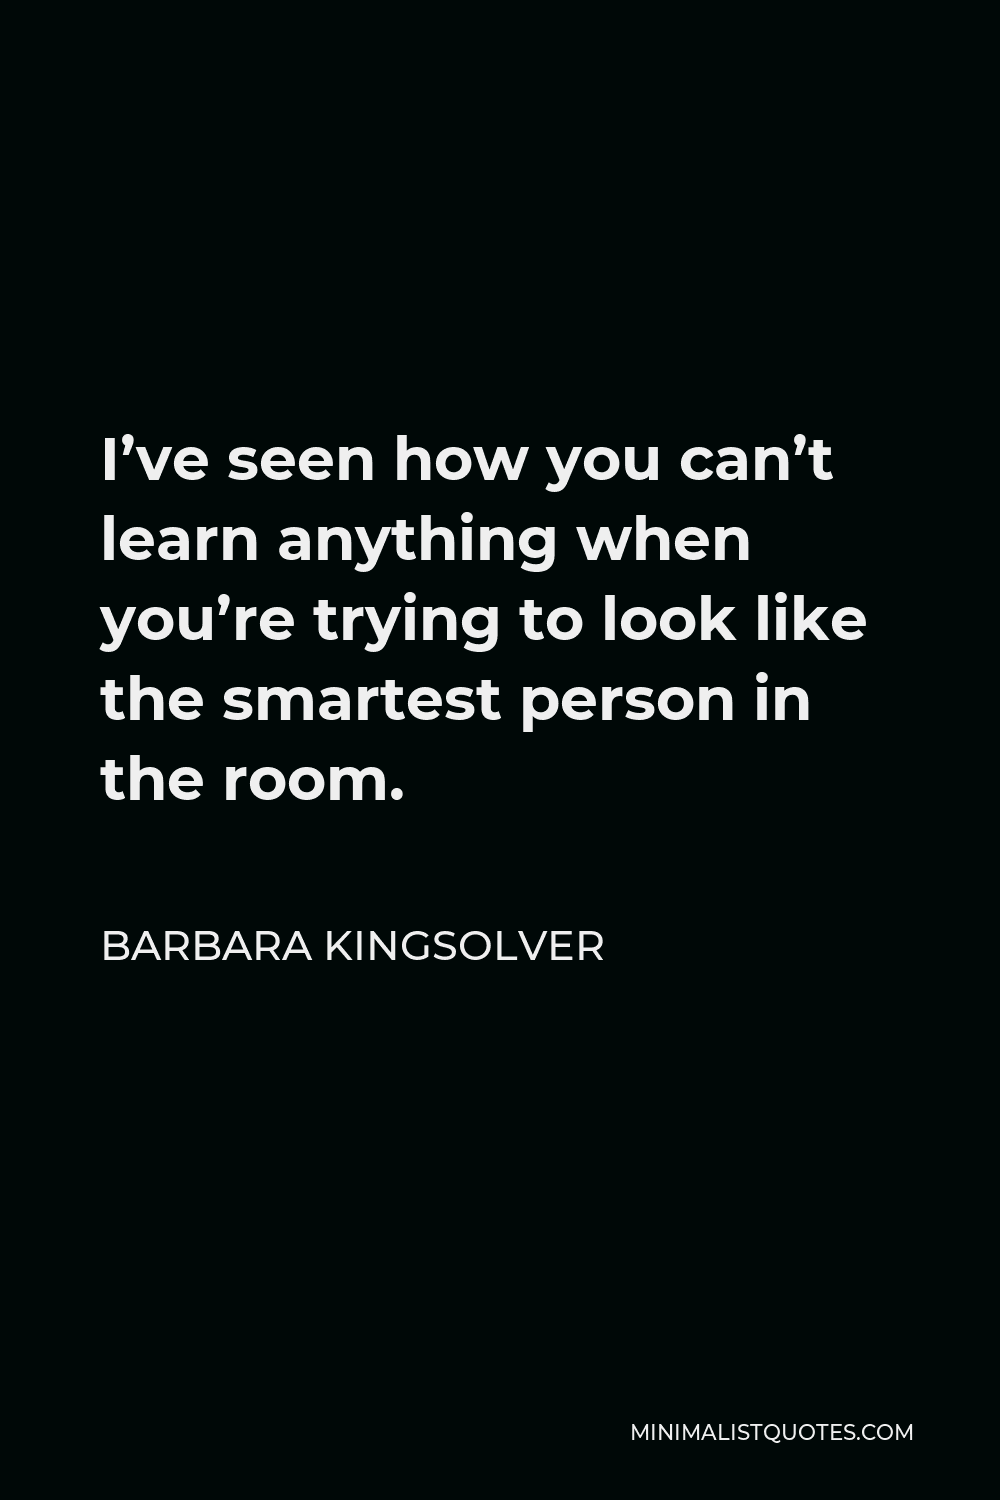 Barbara Kingsolver Quote - I’ve seen how you can’t learn anything when you’re trying to look like the smartest person in the room.